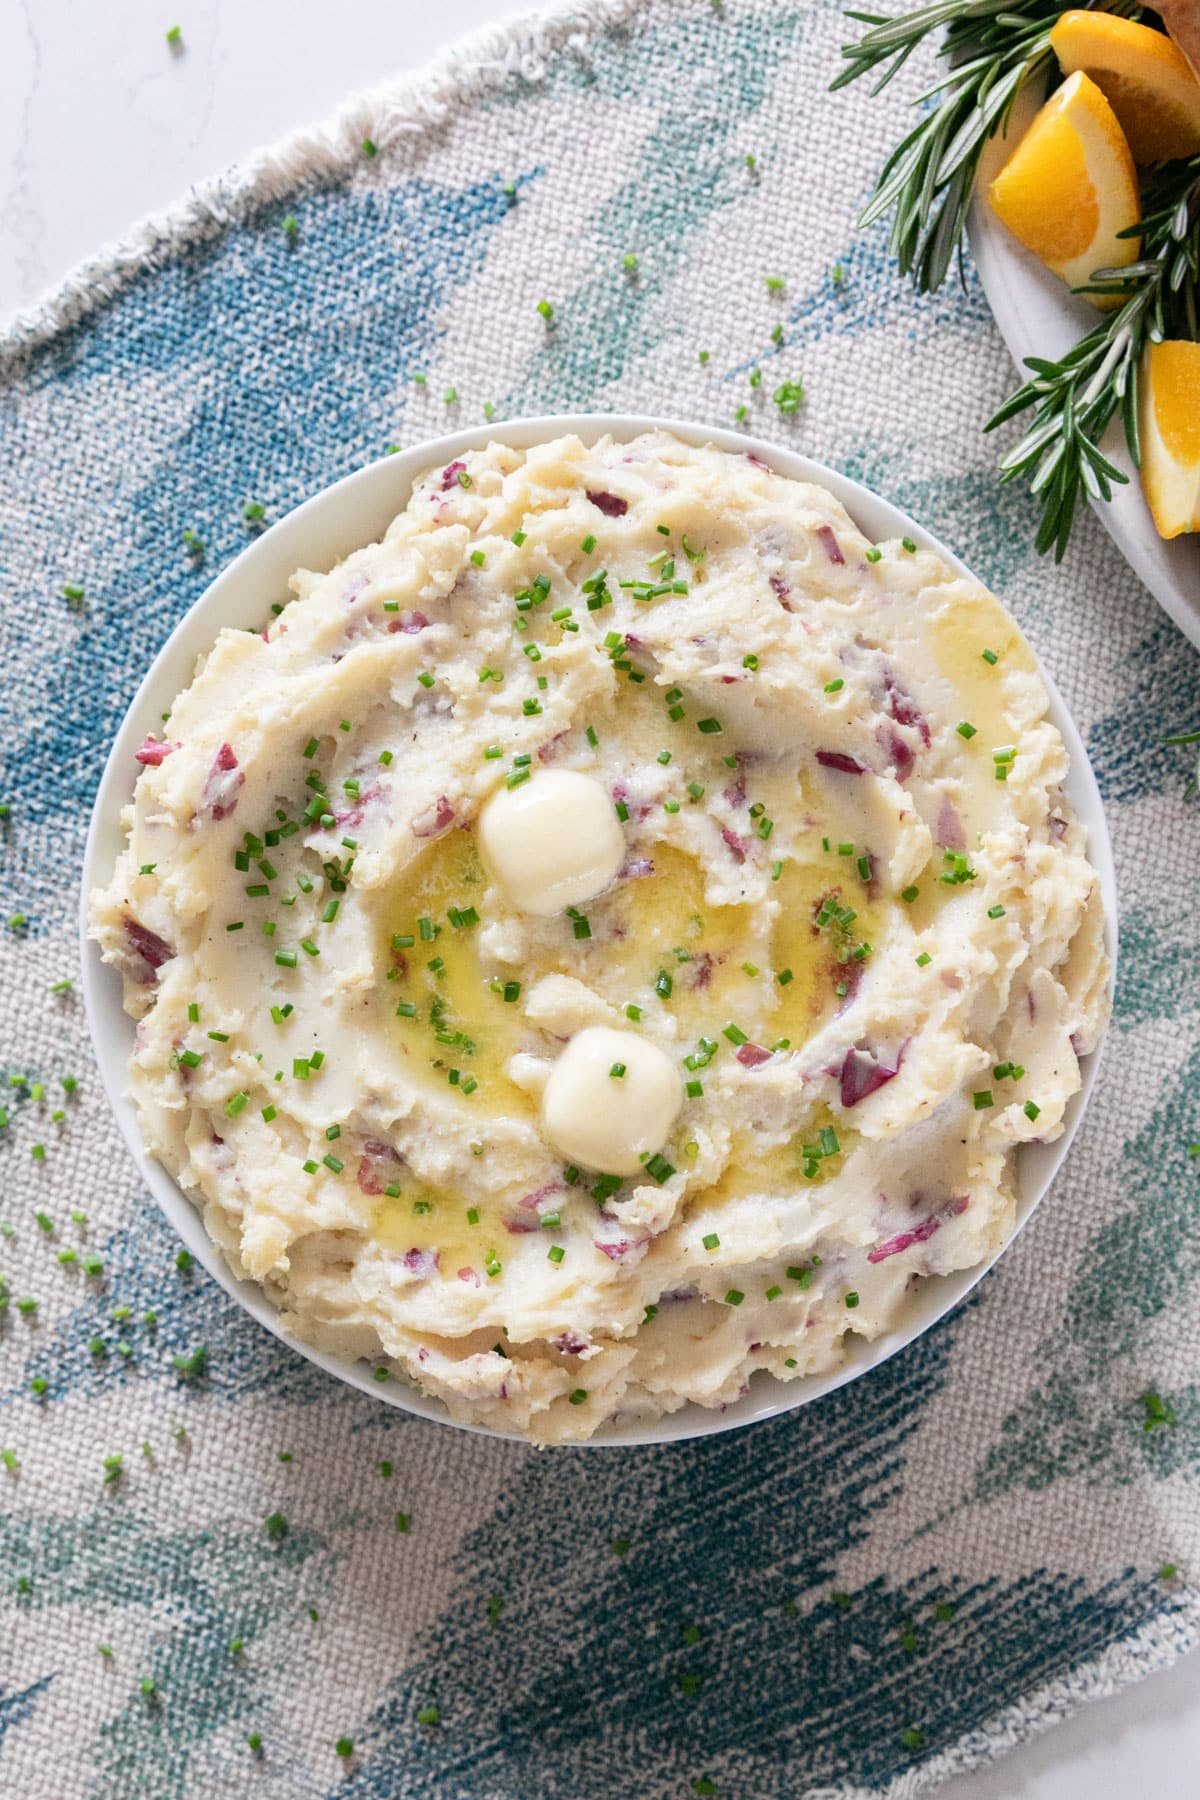 An overhead image of mashed potatoes with melting butter and chives on top.